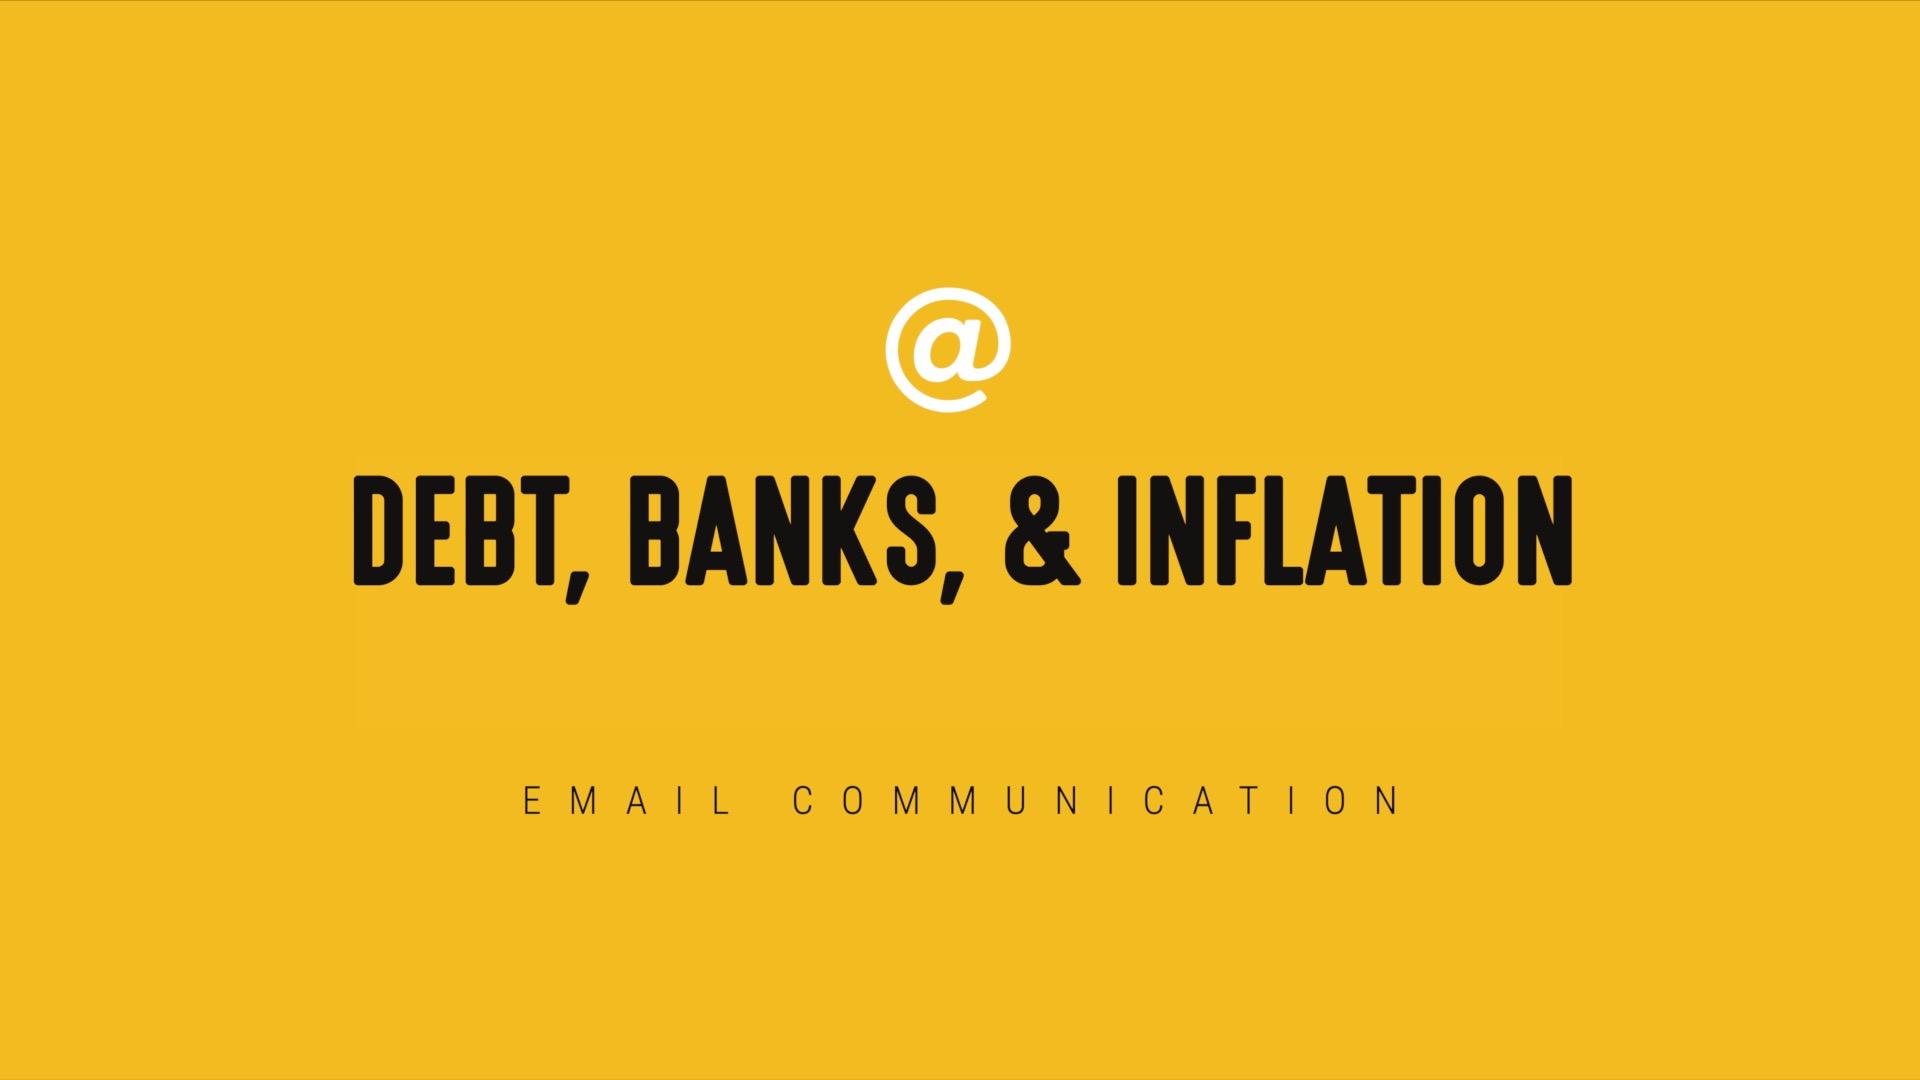 [NEW] Debt, Banks, & Inflation - Timely Email